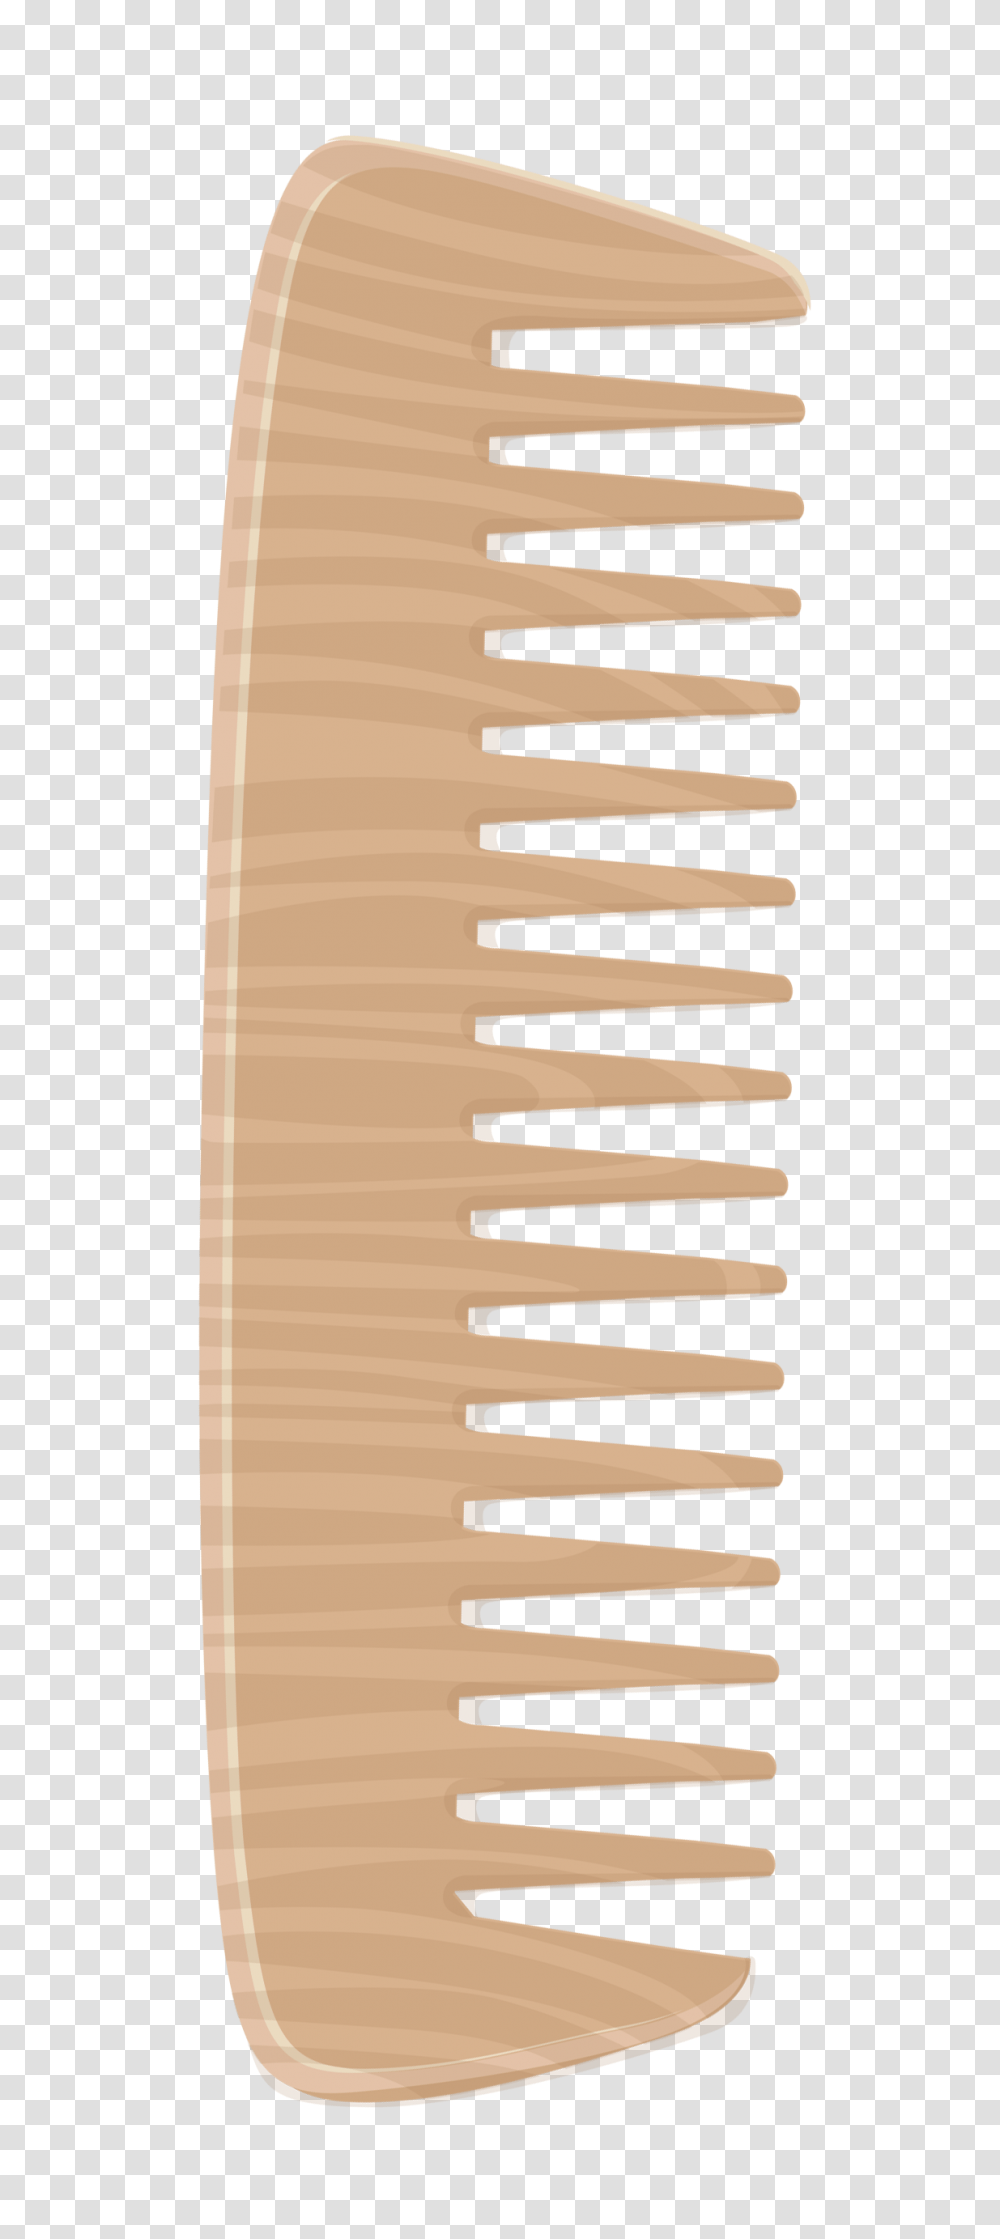 Wooden Comb Clipart, Rug, Plywood, Cardboard, Cutlery Transparent Png